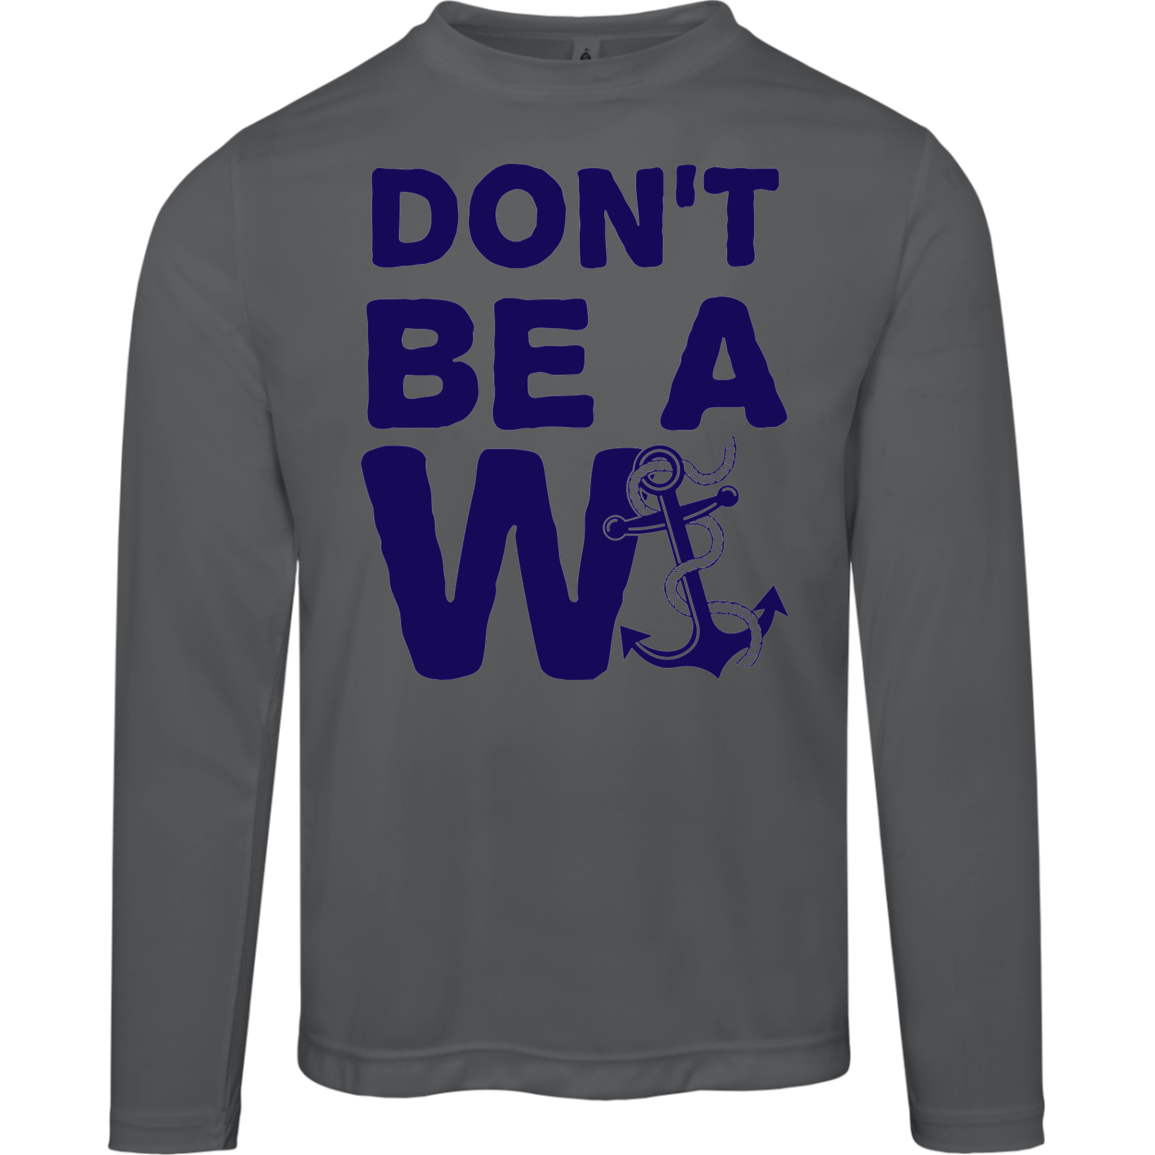 ***2 SIDED***  HRCL FL - Navy Don't Be A Wanker - 2 Sided - UV 40+ Protection TT11L Team 365 Mens Zone Long Sleeve Tee